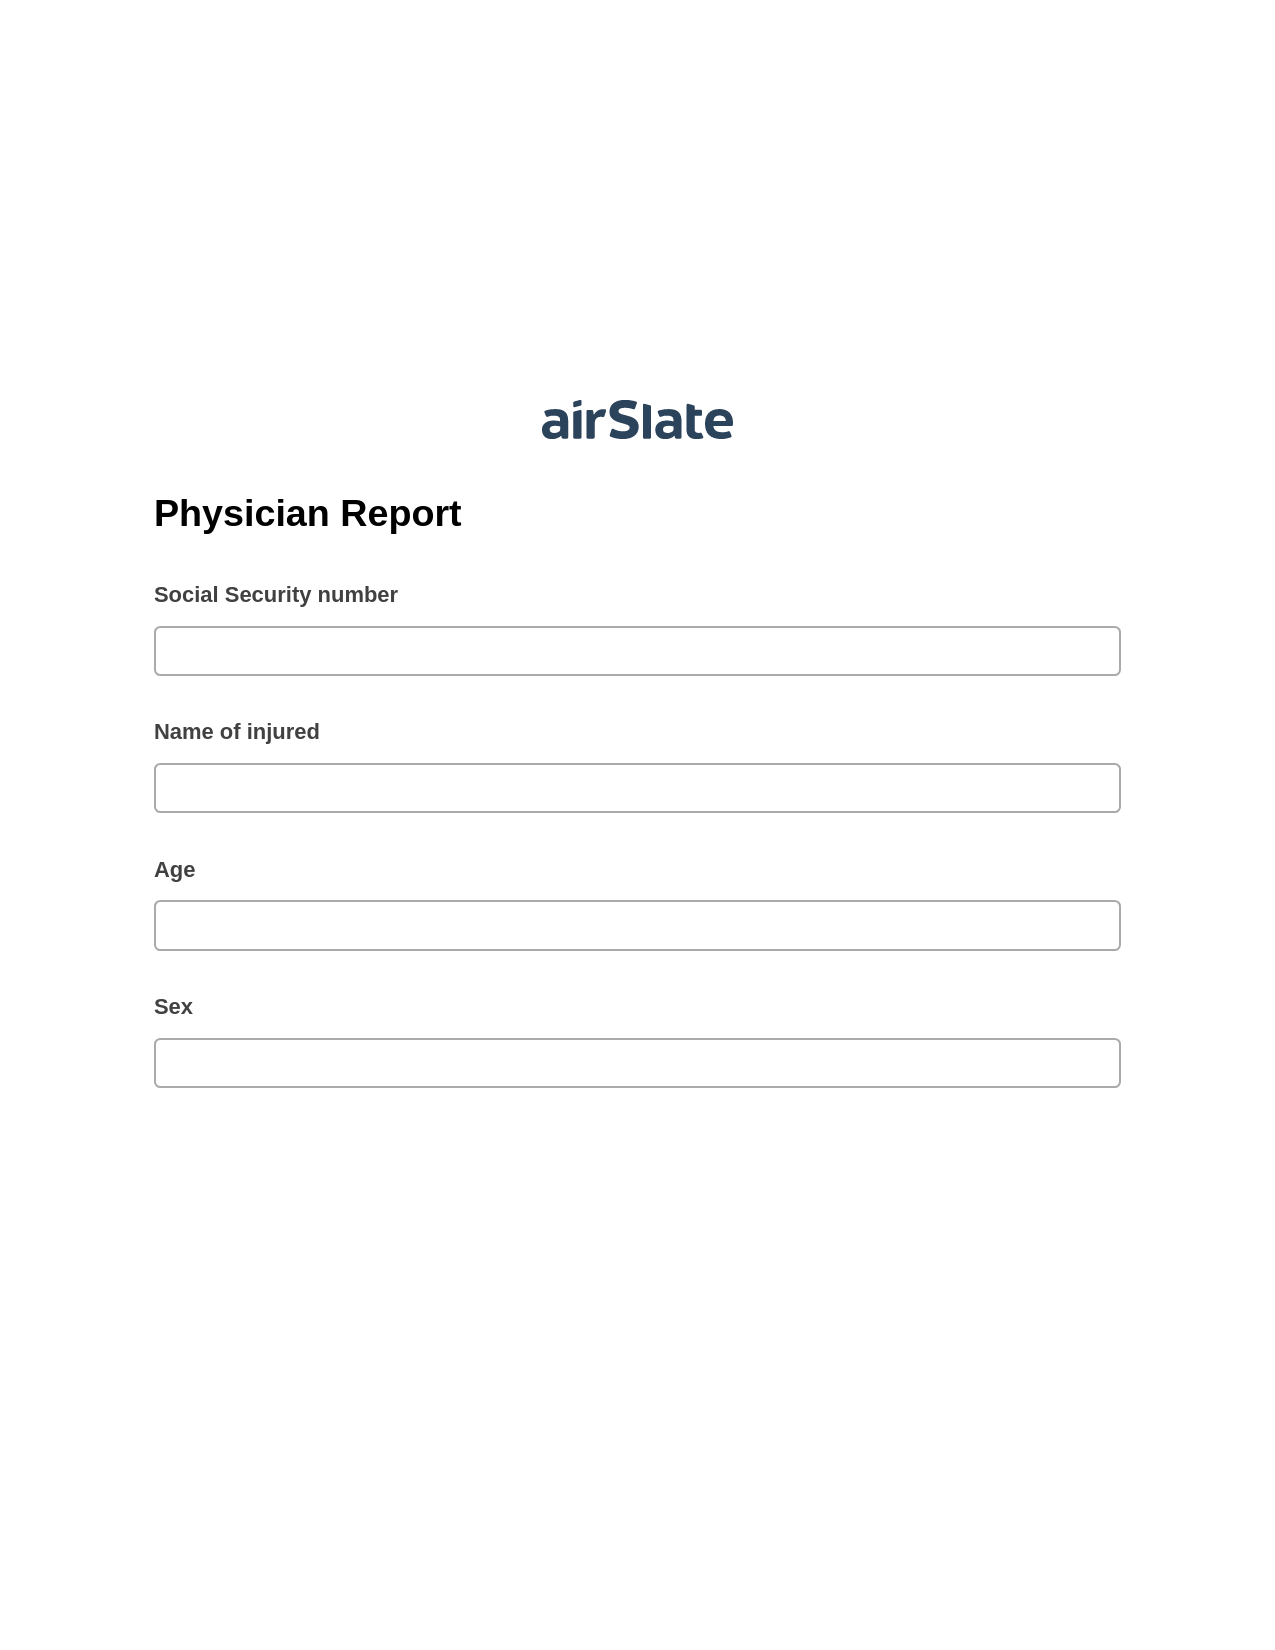 Physician Report Pre-fill Dropdowns from Airtable, Update NetSuite Record Bot, Export to Excel 365 Bot